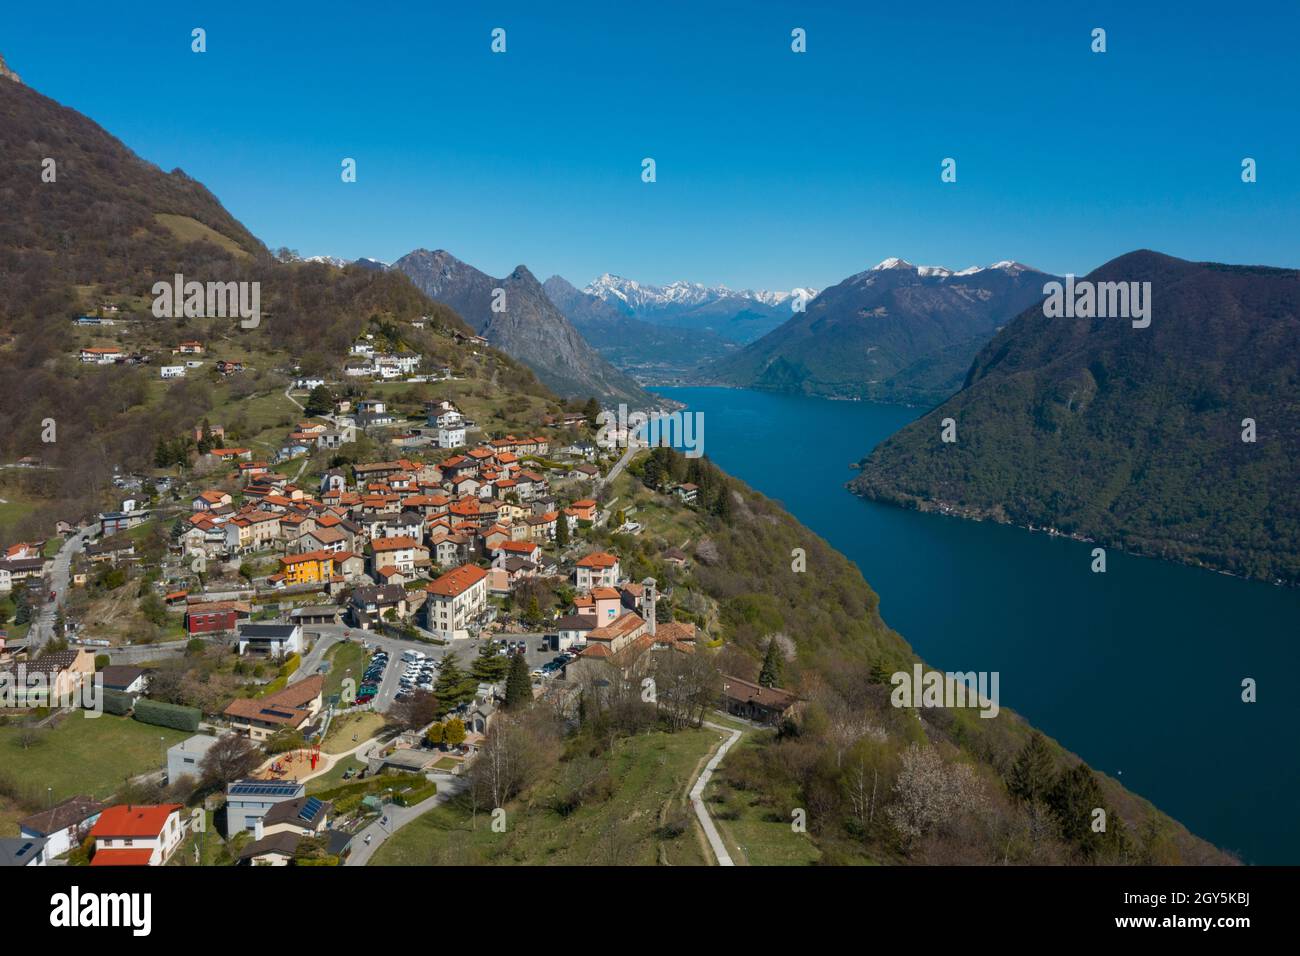 Aerial view of Lugano lake and the Monte Brè village in Canton Ticino in southern Switzerland. Sunny day Stock Photo